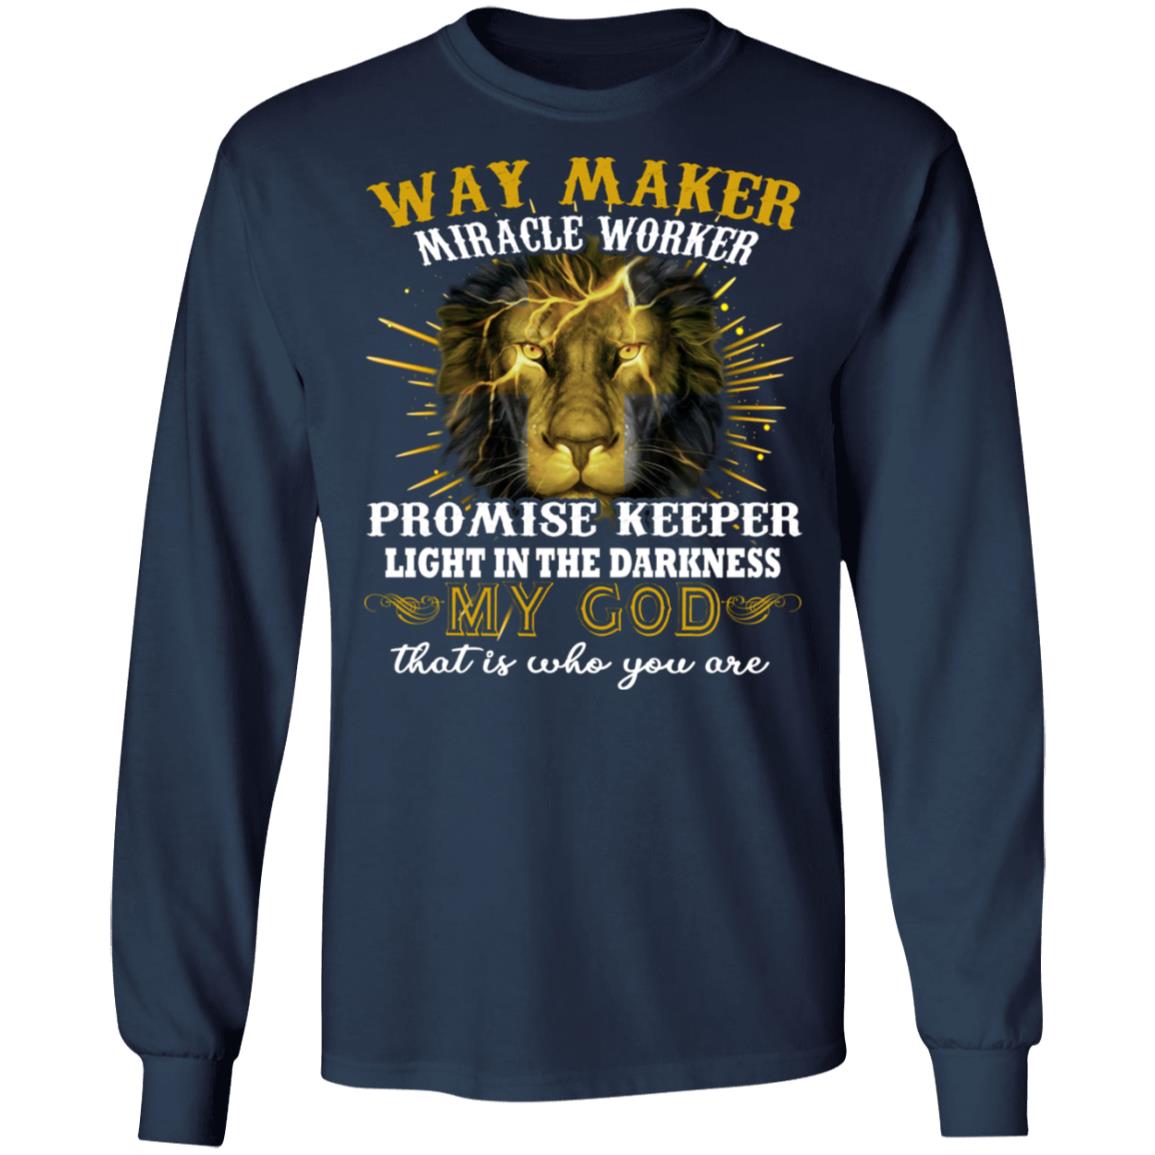 Way Maker Miracle Worker - Promise Keeper Light In The Darkness Shirt